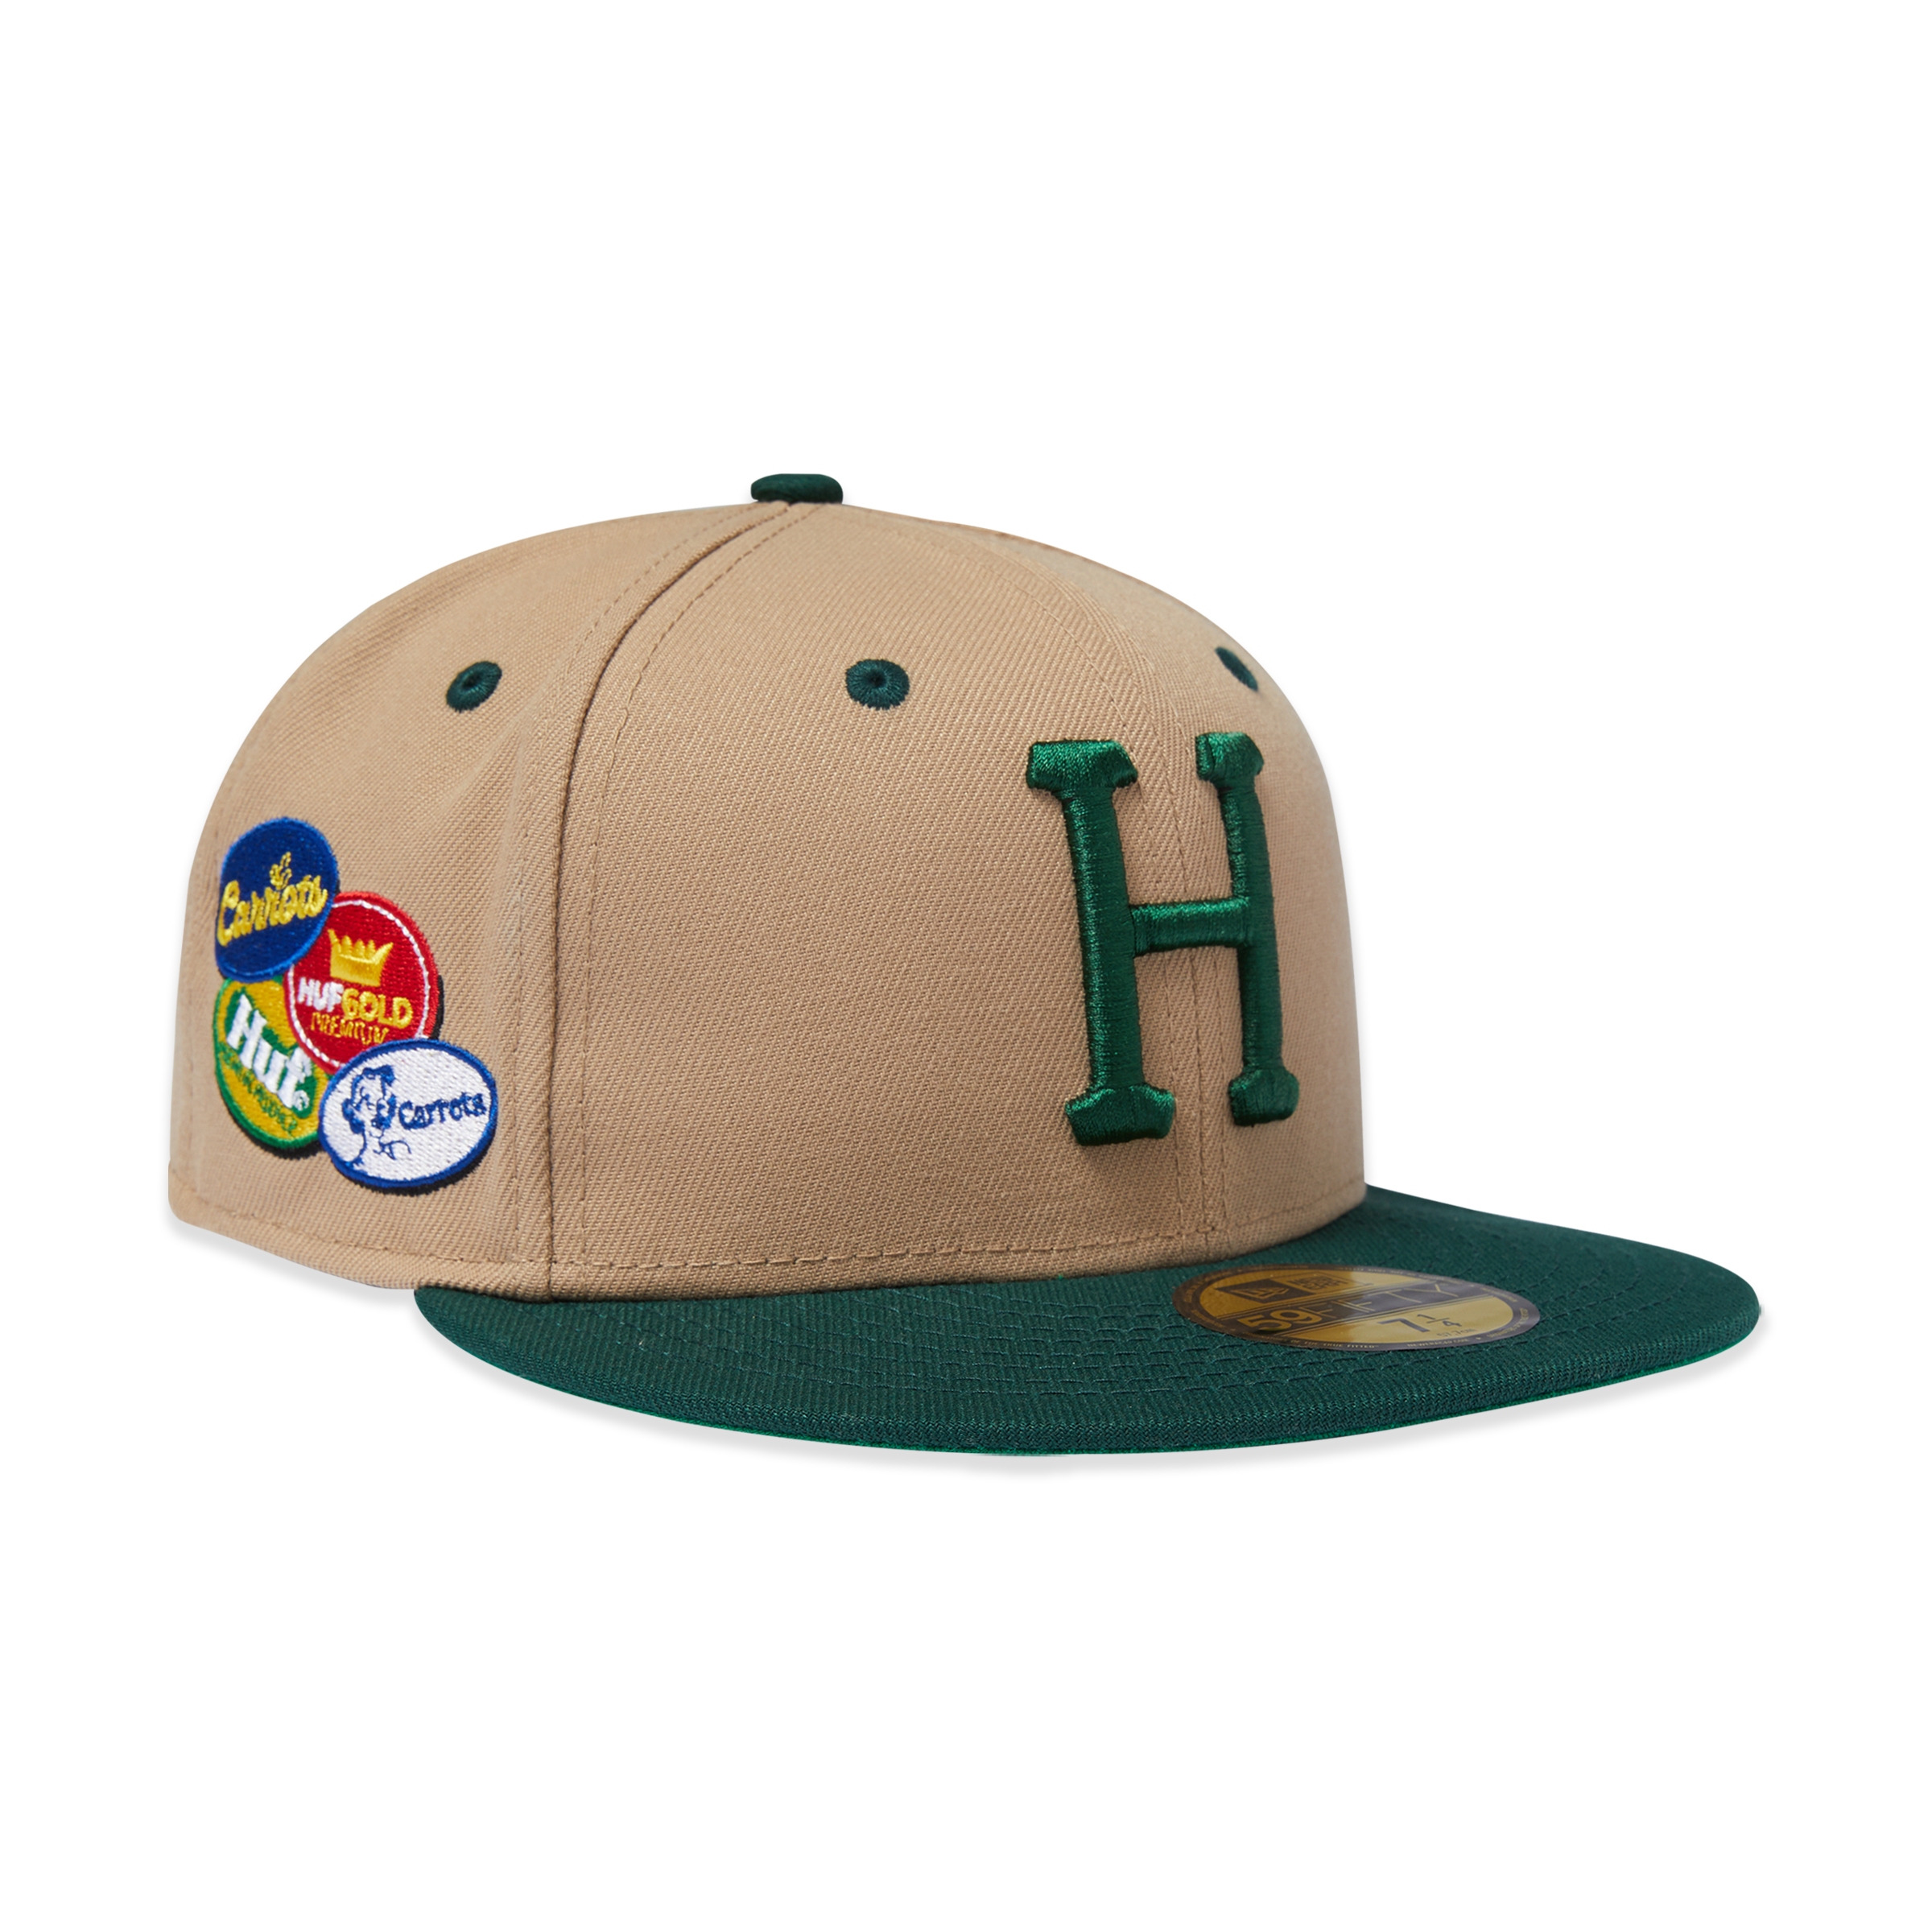 HUF x Carrots High Grade New Era Fitted Hat